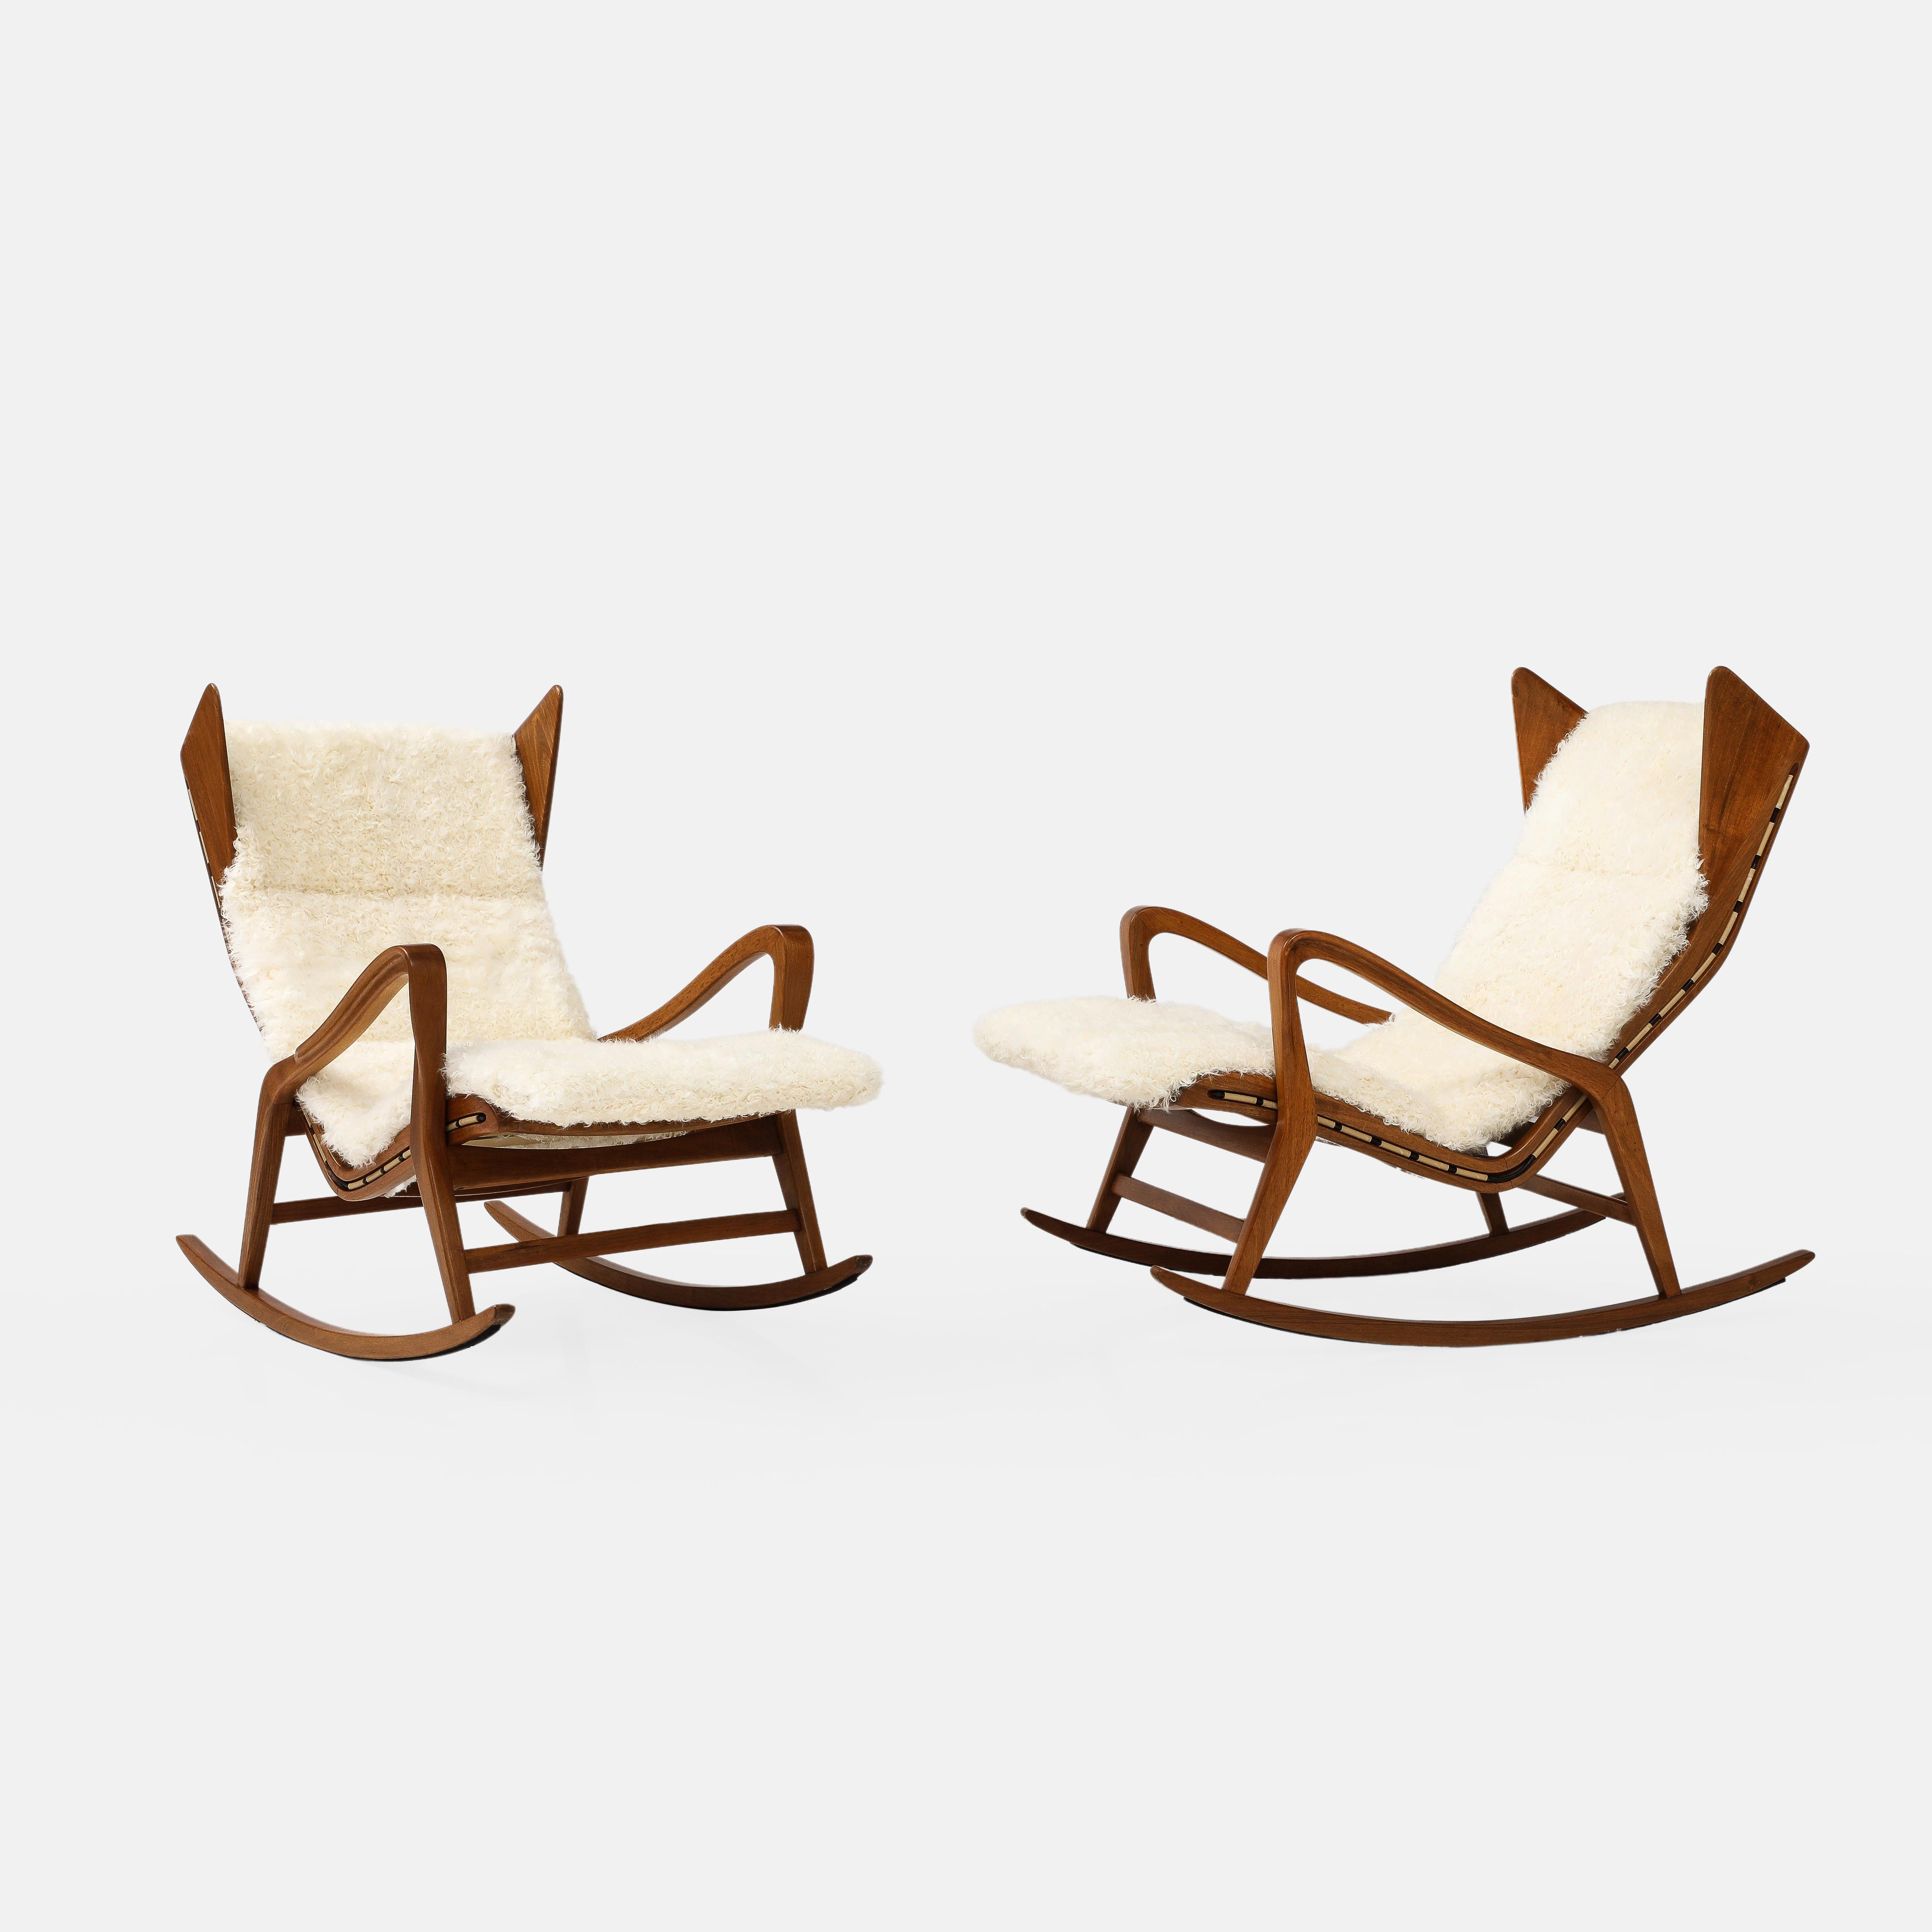 Cassina, sculptural walnut rocking lounge chairs model 572 with ivory Kalgan lambskin channeled cushions on Pirelli webbing, Italy, 1955.  These exquisite modernist rocking chairs have exquisite detailing throughout including finely carved walnut